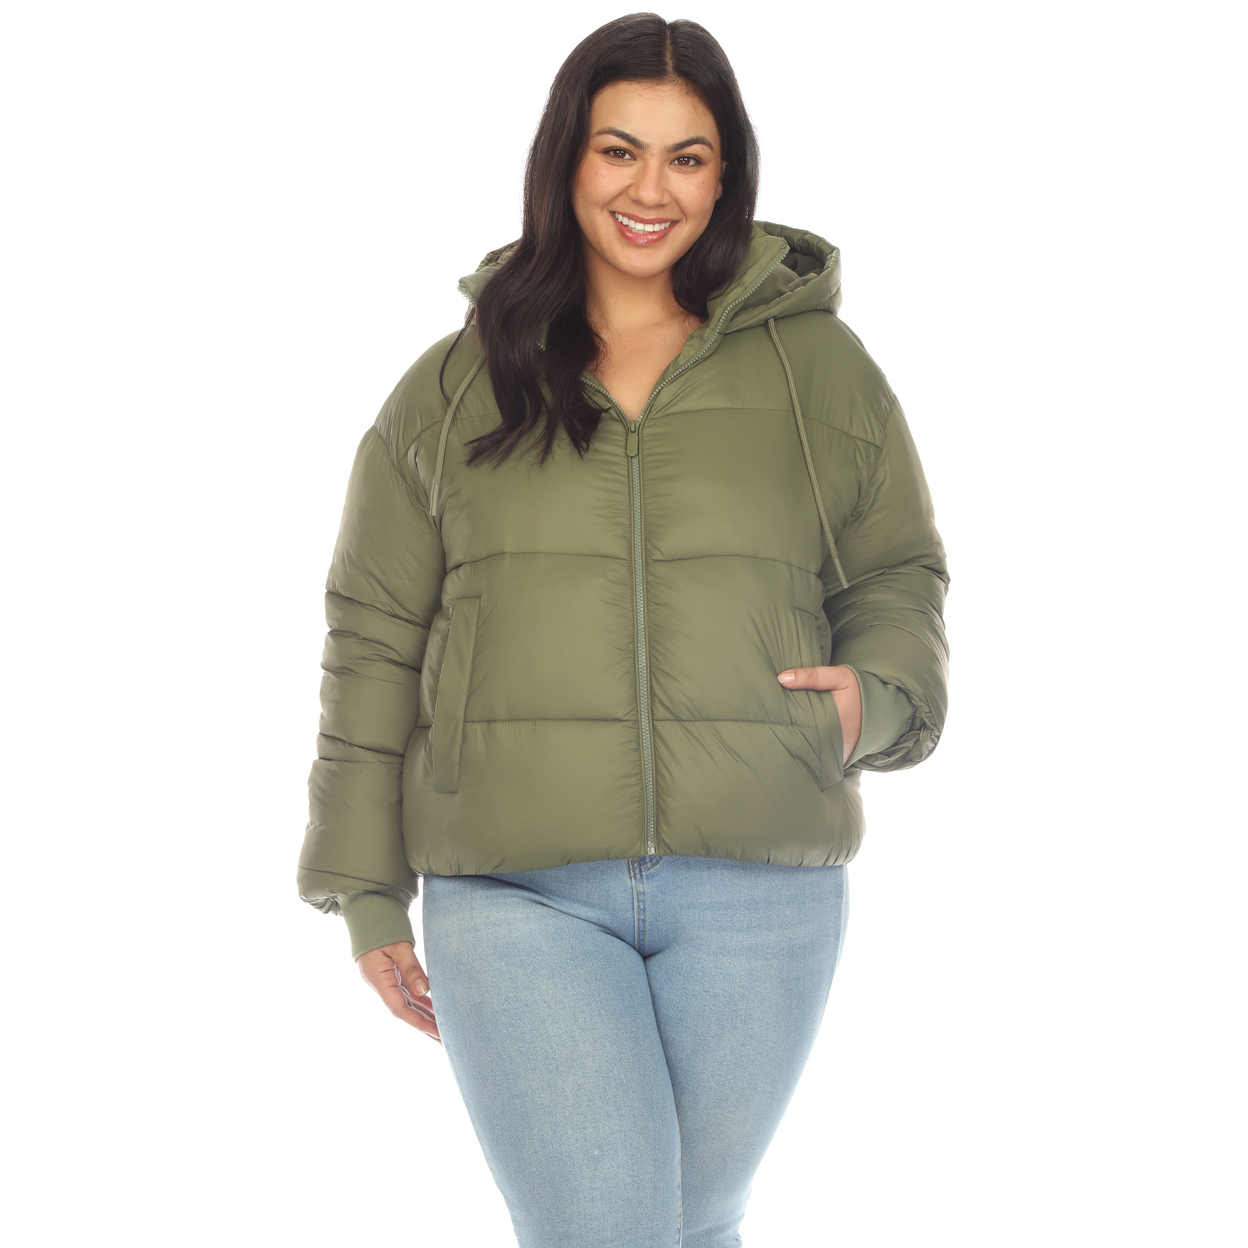 White Mark Women's Zip Hooded Puffer Jacket With Pockets - Olive, 1x